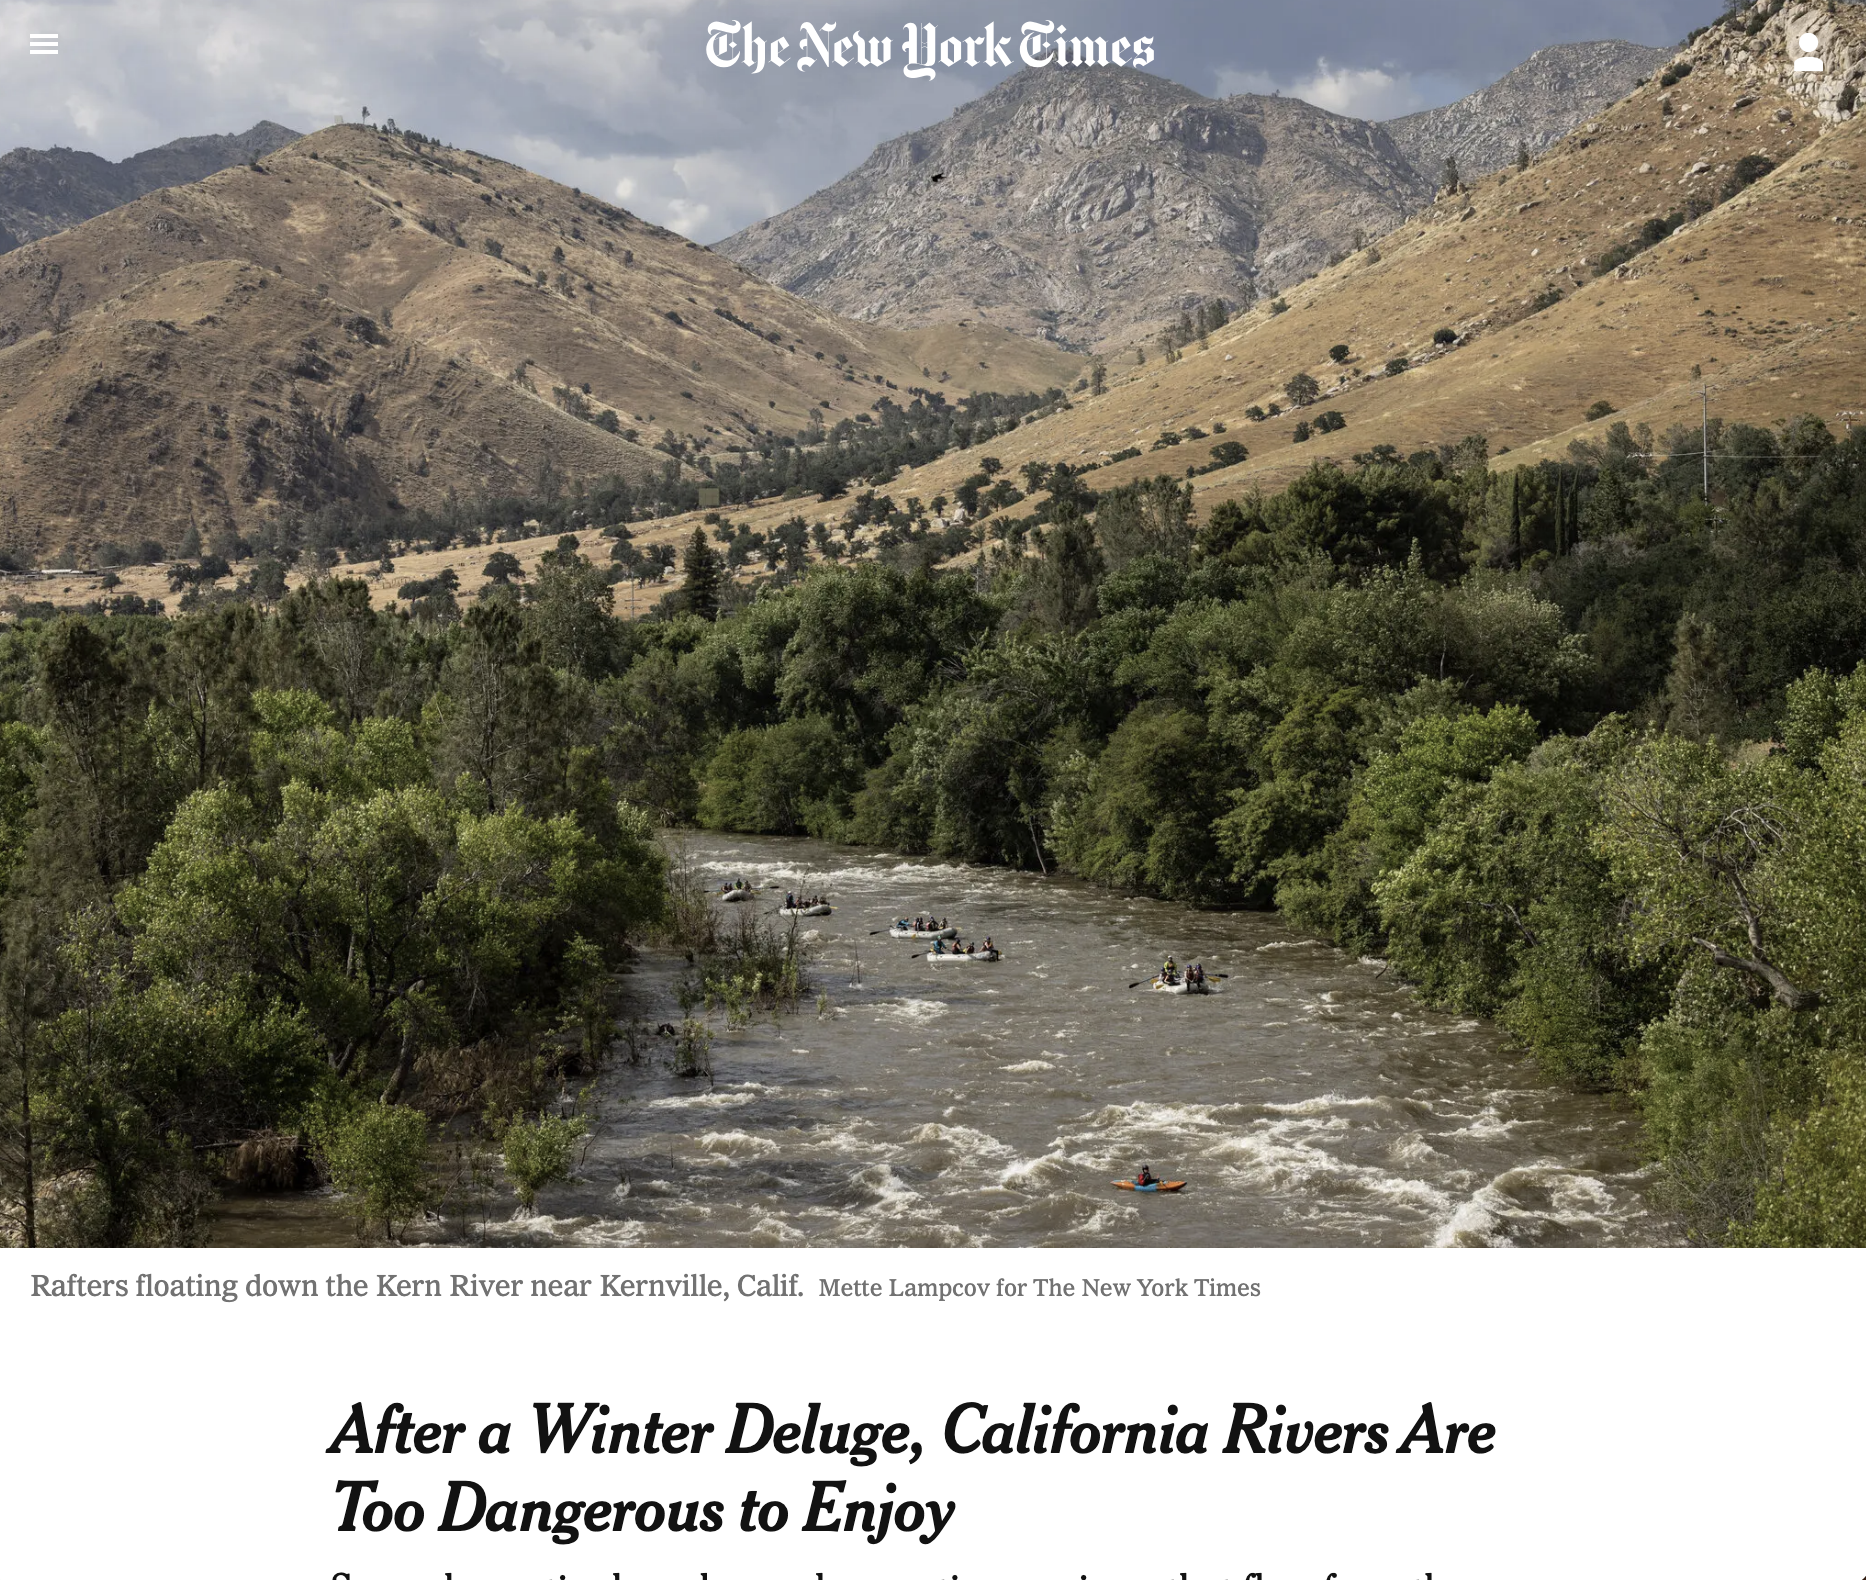 After a Winter Deluge, California Rivers Are Too Dangerous to Enjoy